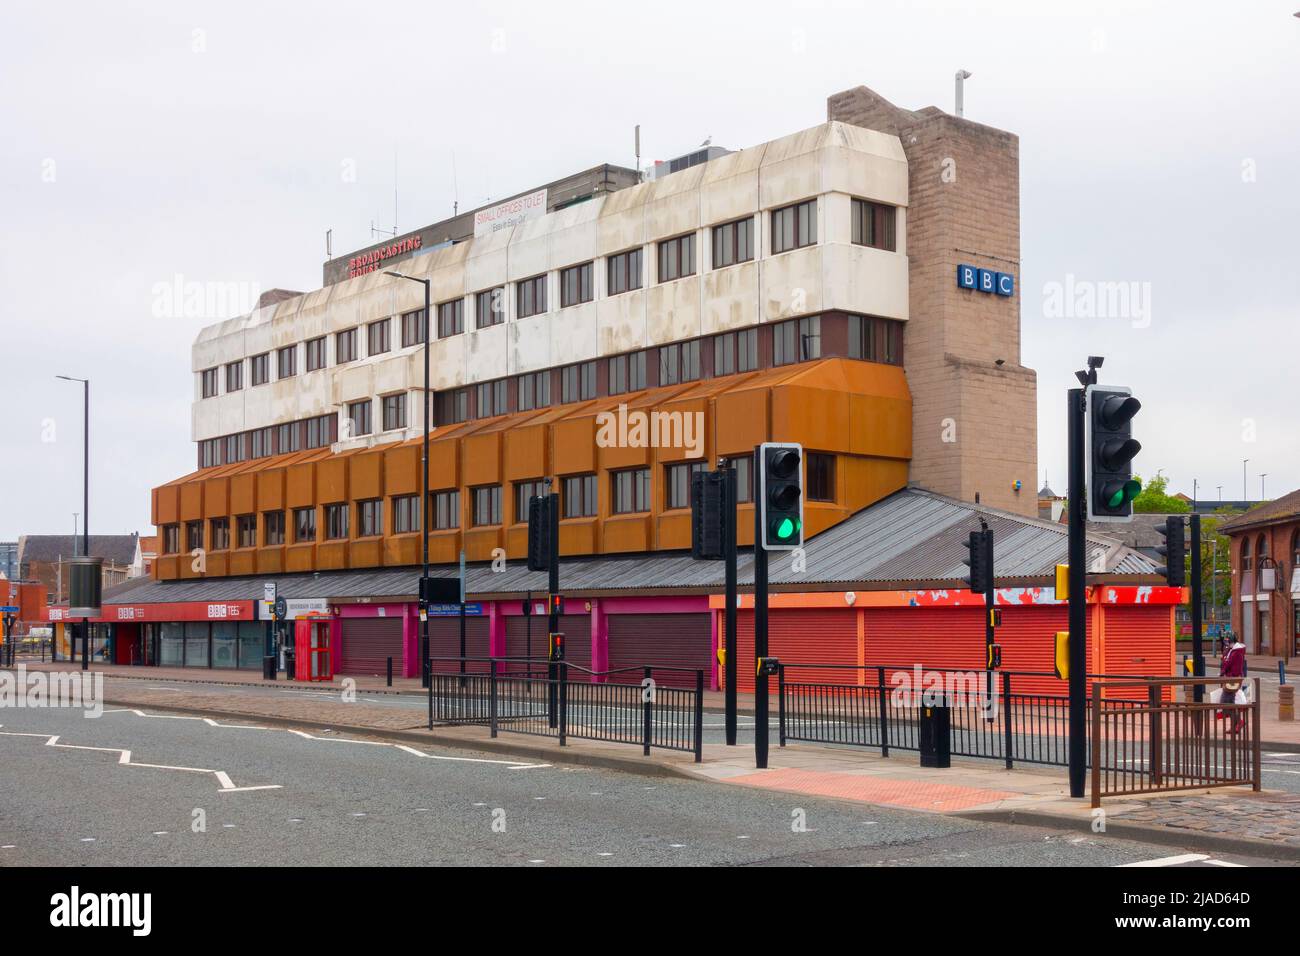 British Broadcasting Corporation BBC Tees local broadcasting house building in Middlesbrough Stock Photo